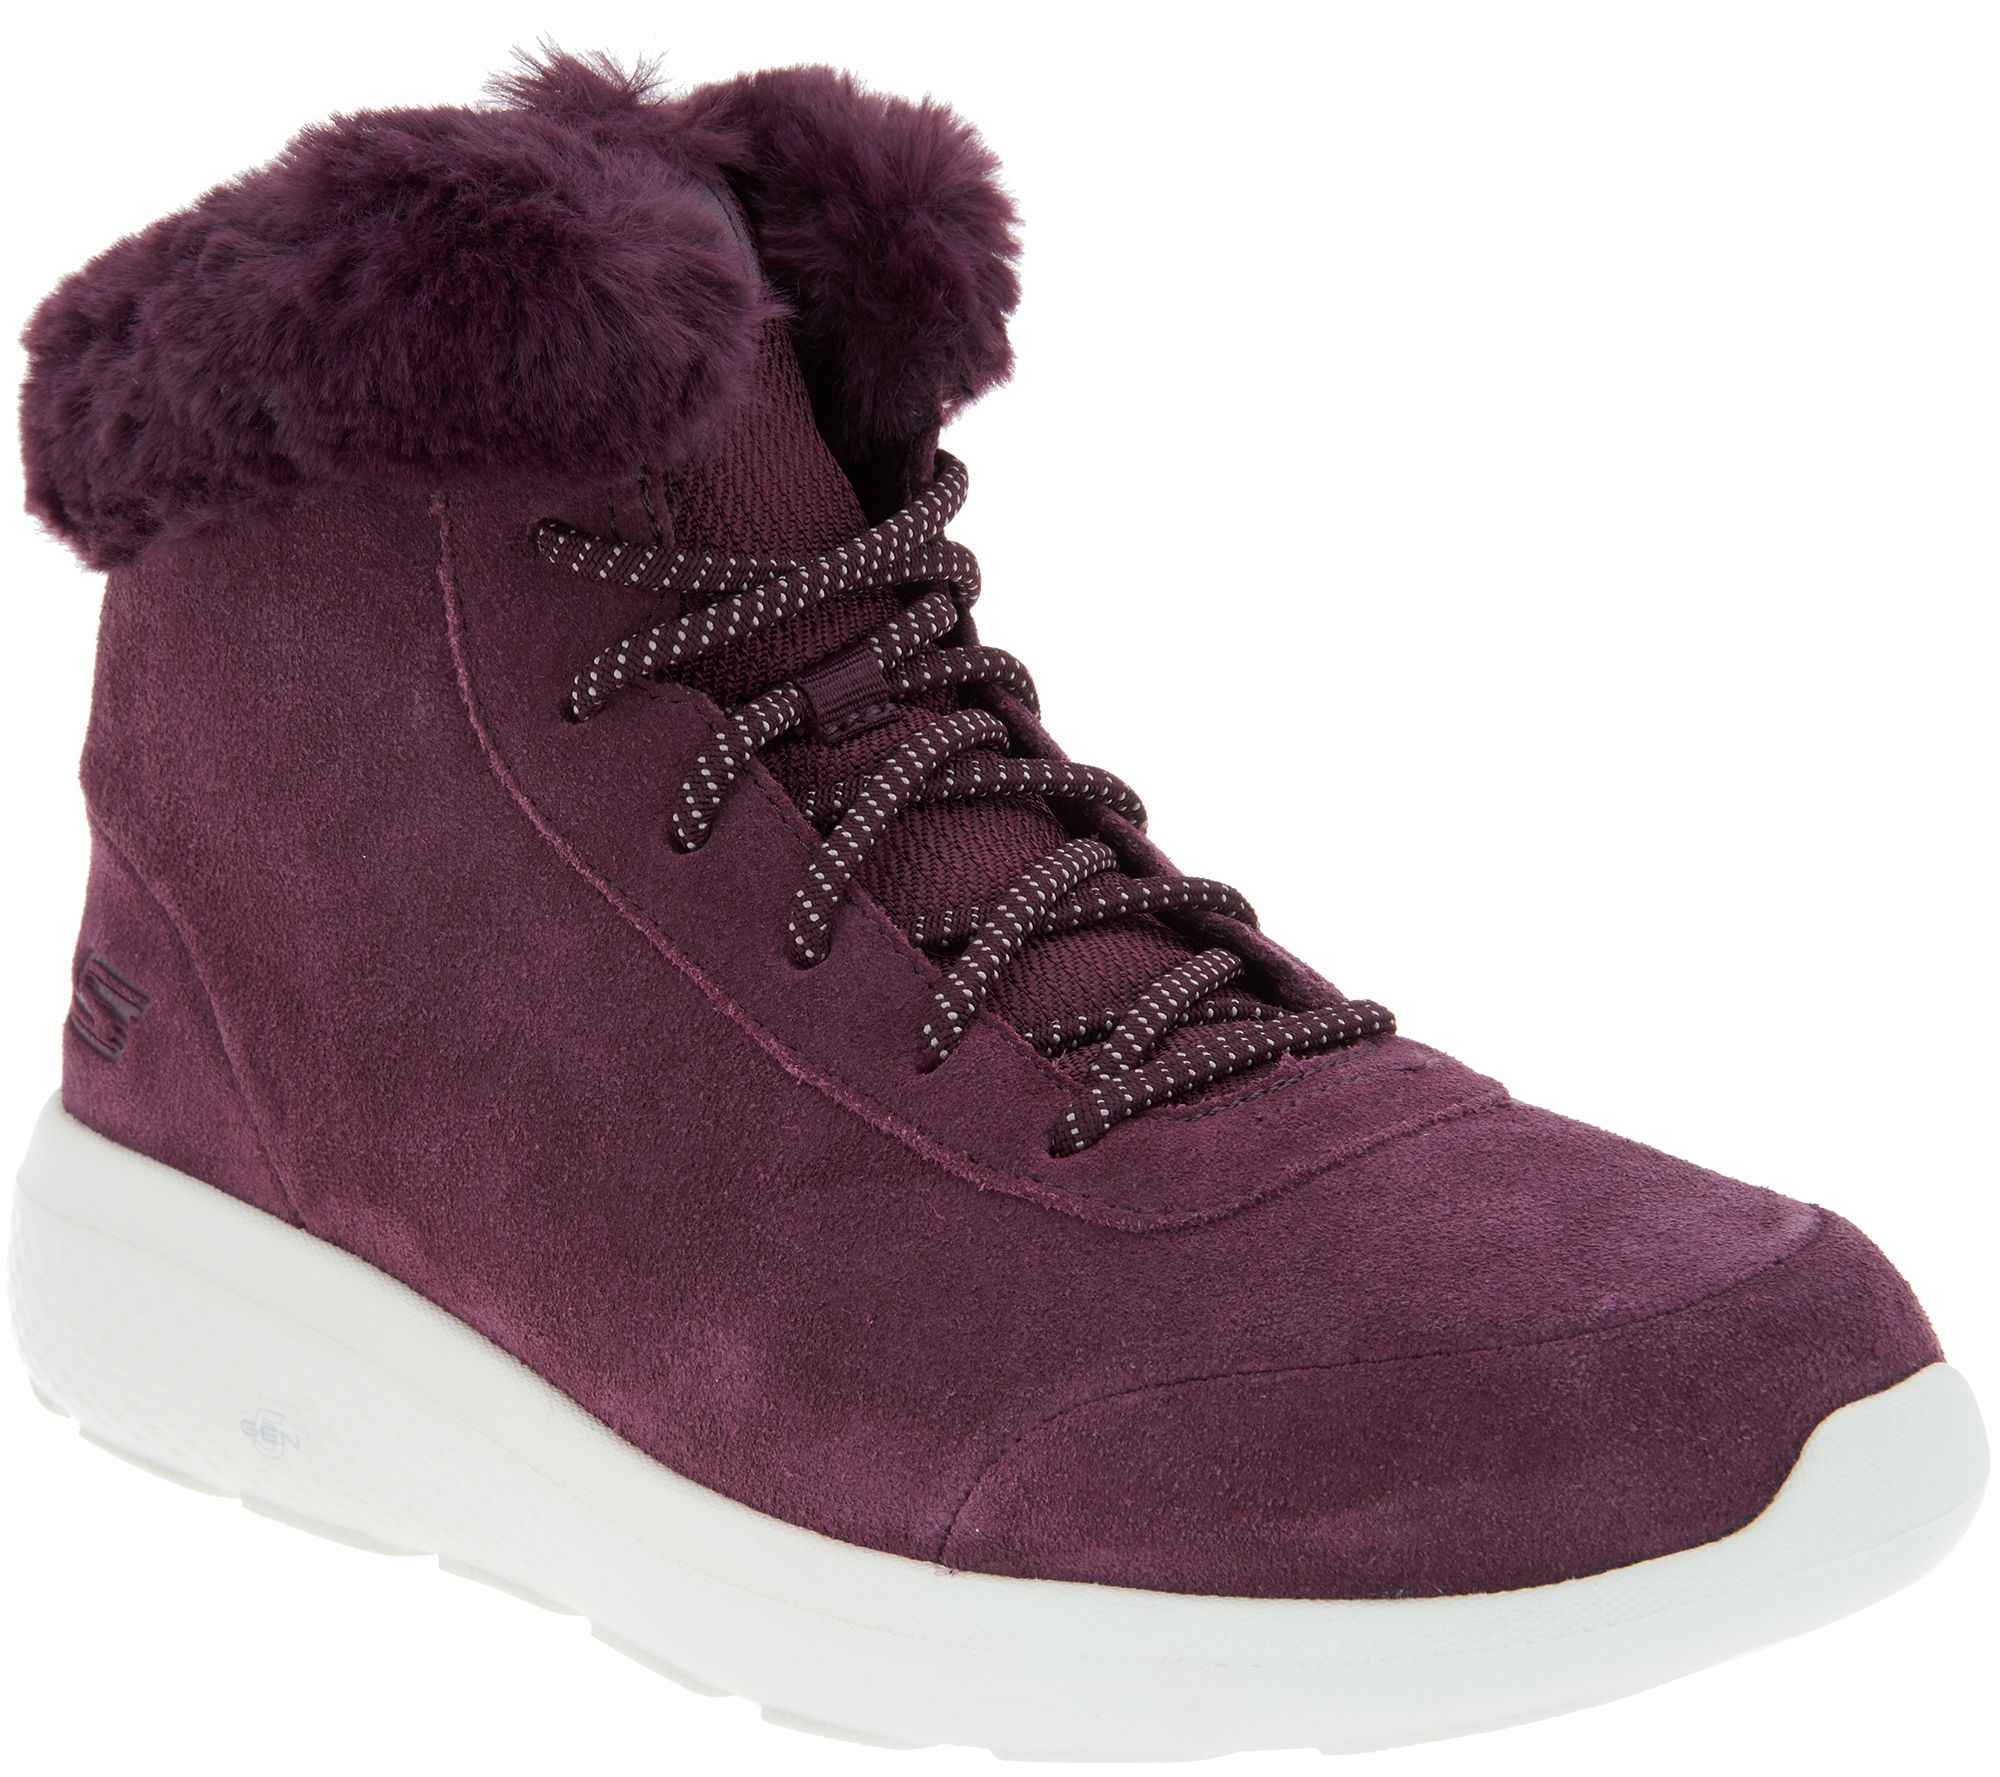 Skechers On-the-GO Suede Boots - City 2 - Chilled - QVC.com